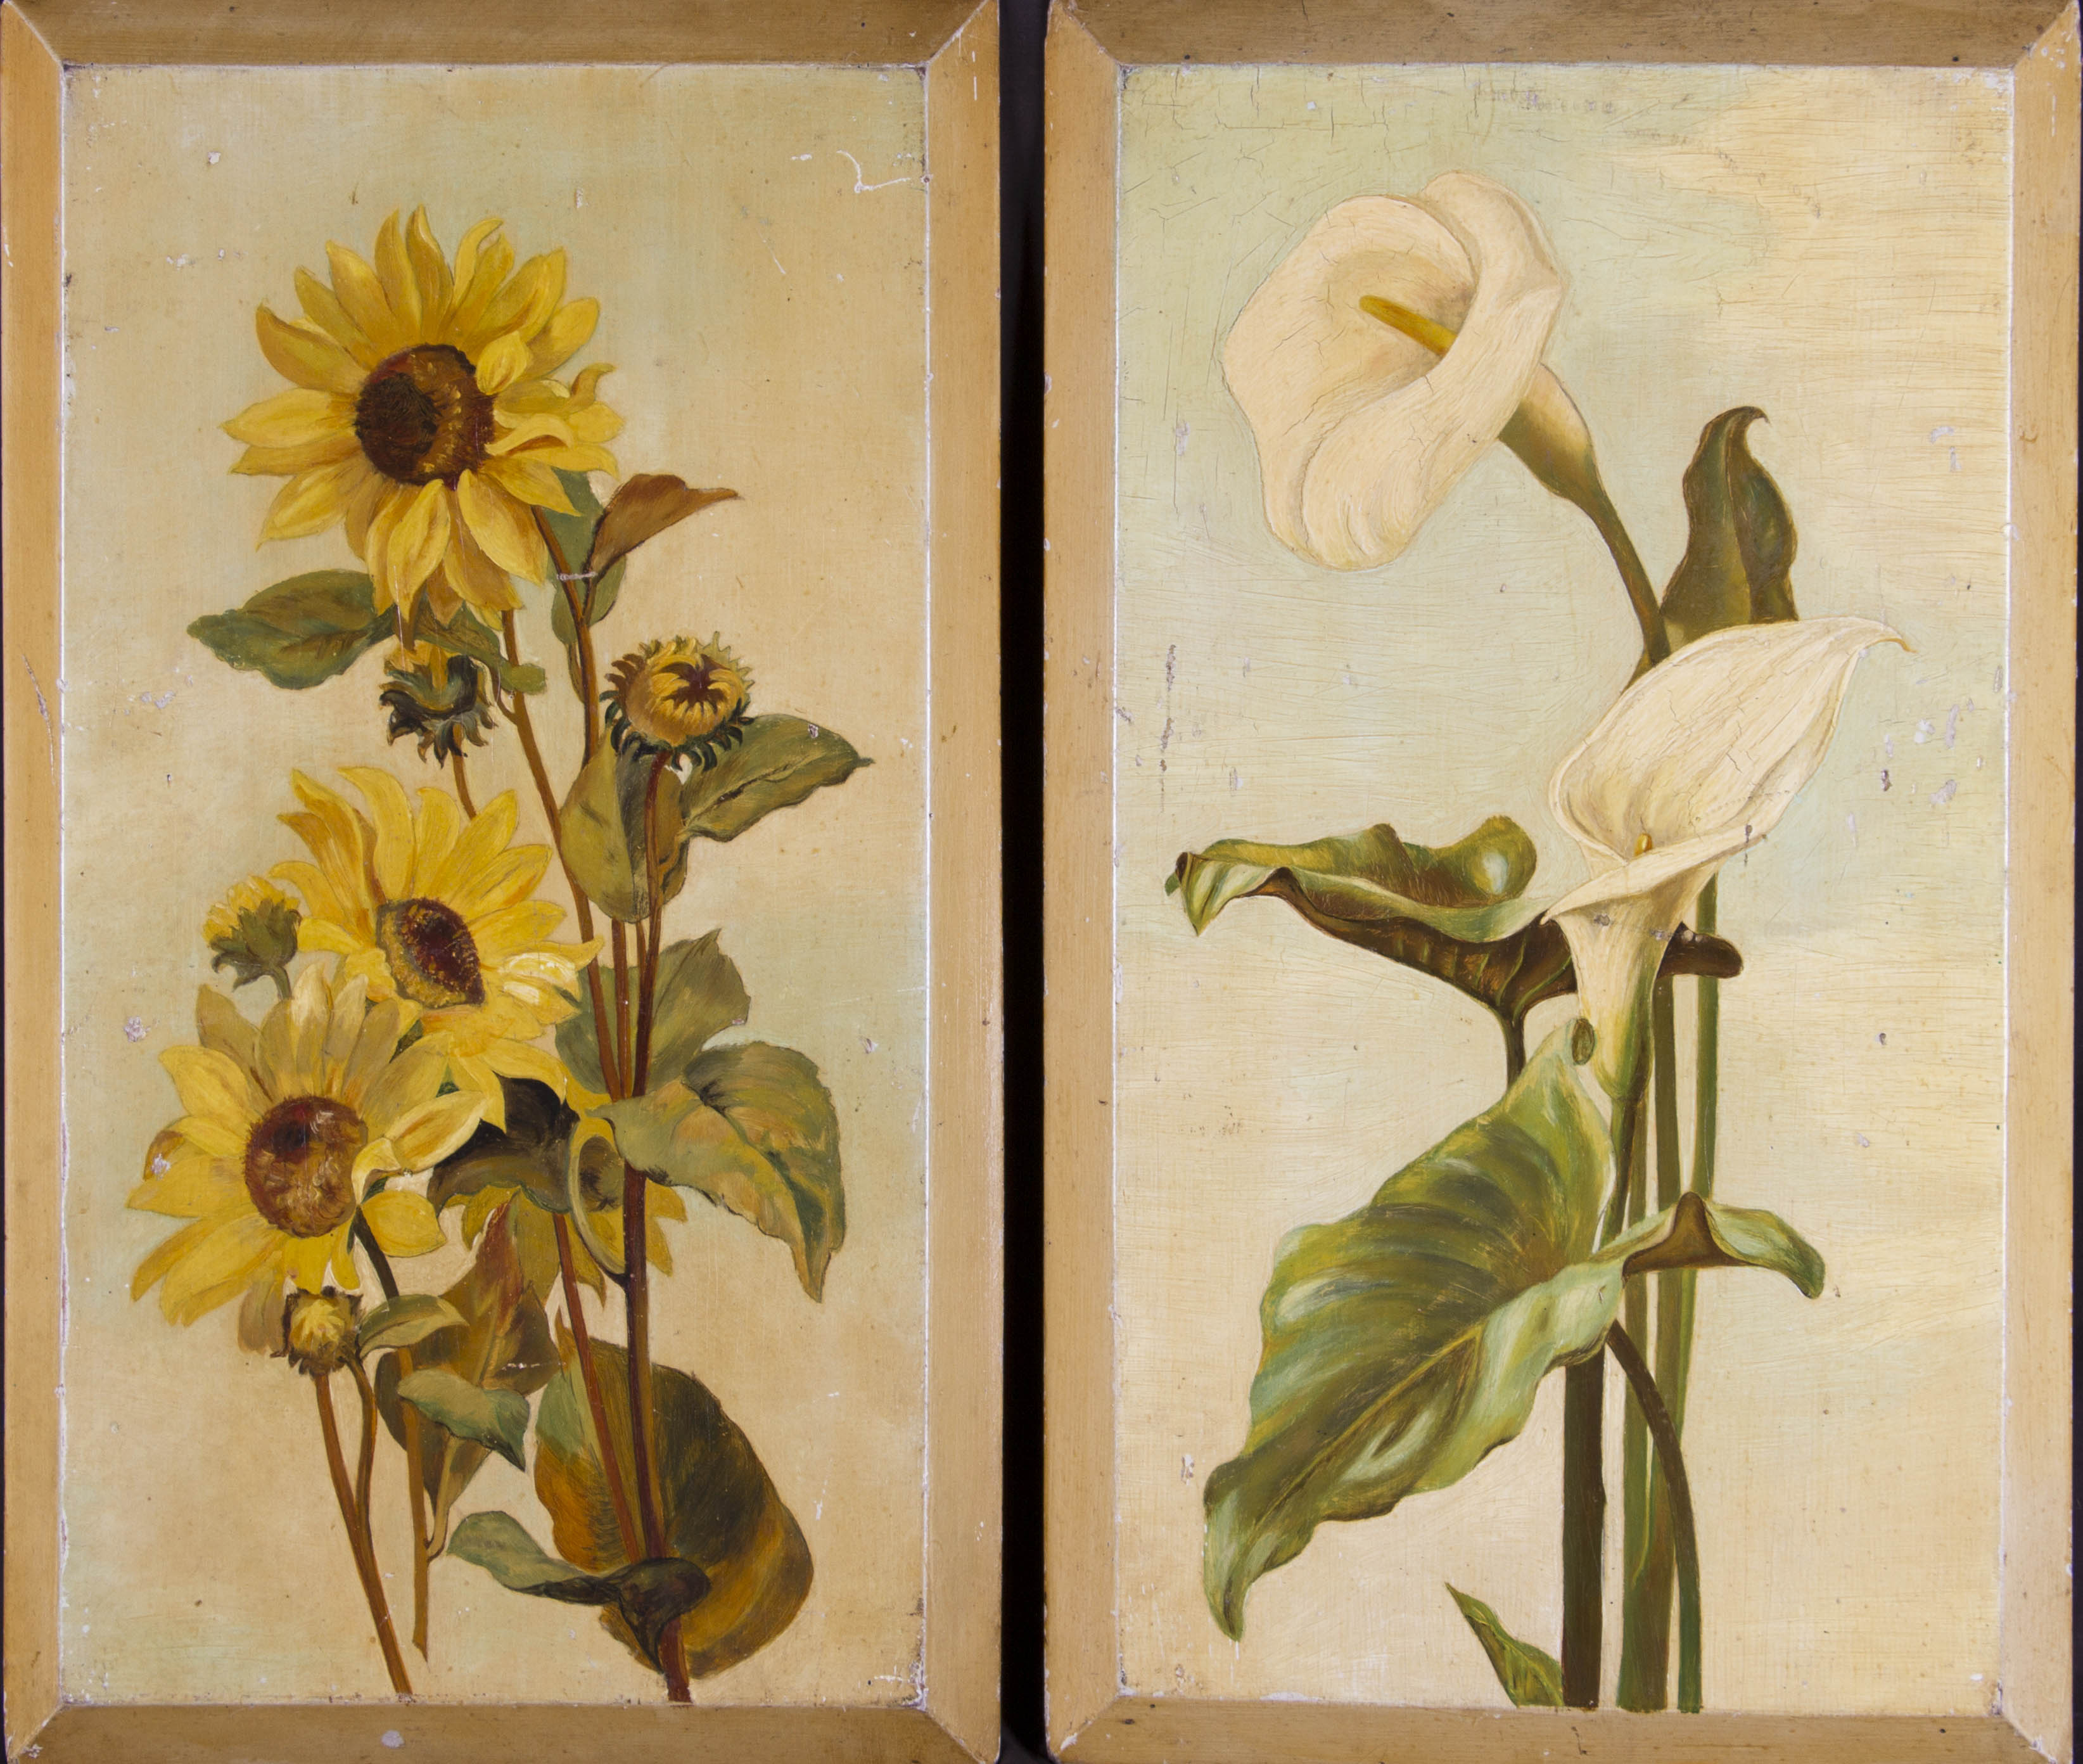 A pair of unframed, unsigned, oils on panel, studies of flowers, one showing white lilies, the other